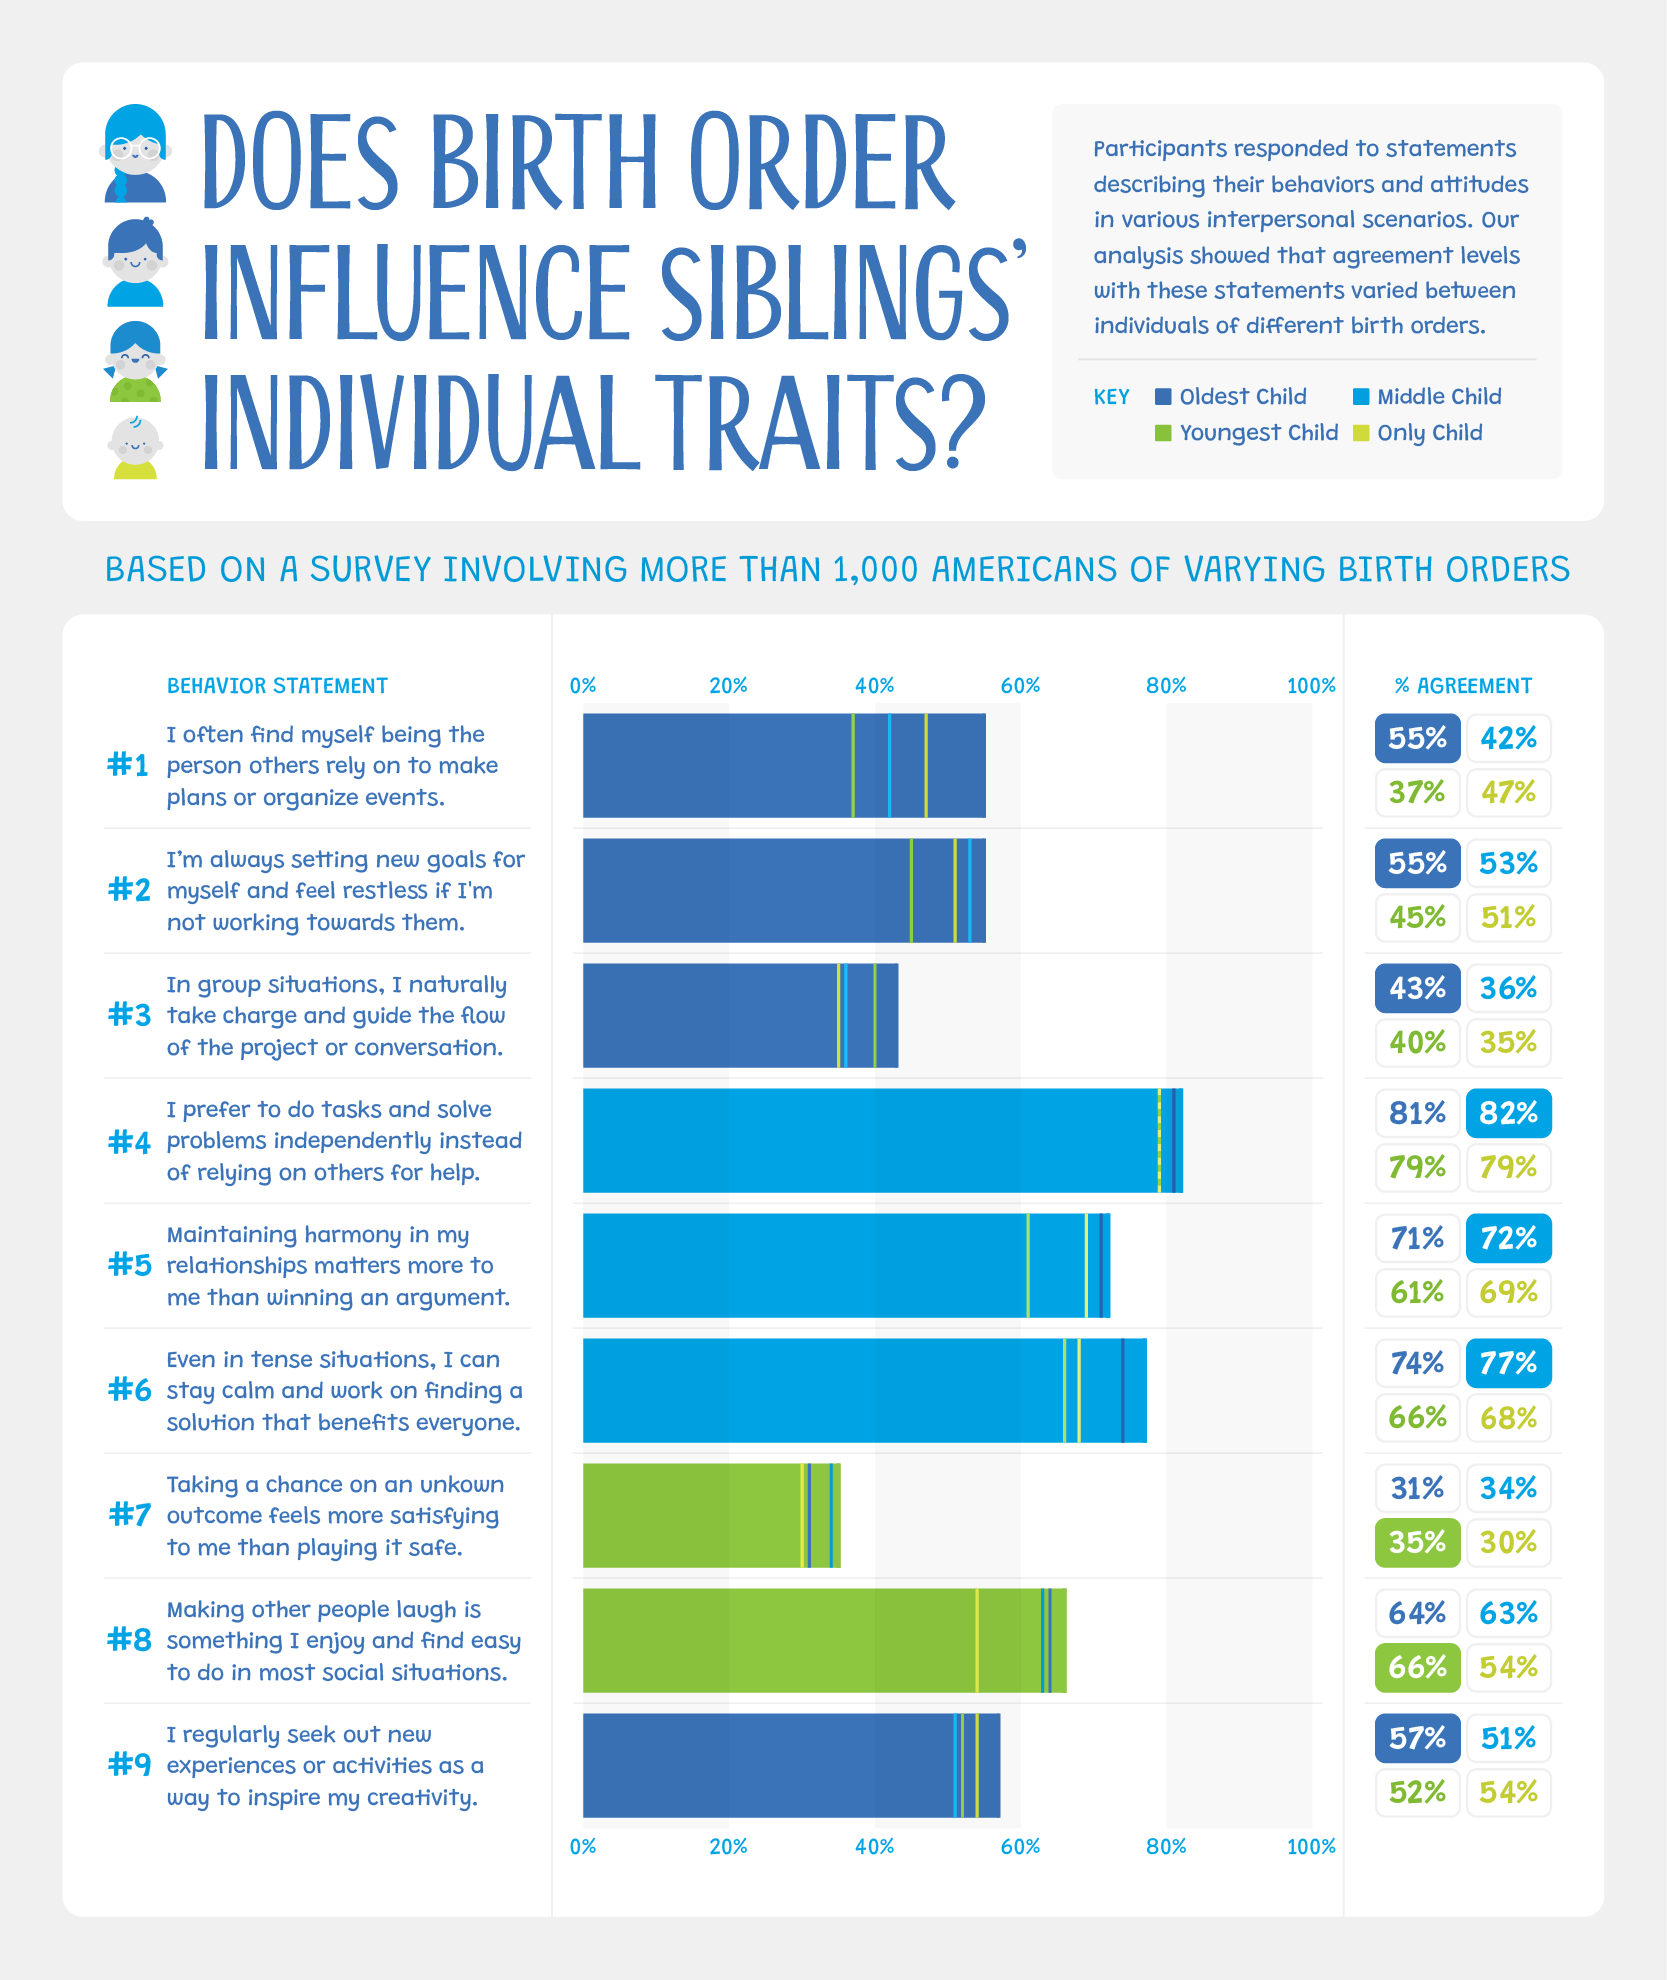 Graphic displaying survey results of siblings to different behavior-based statements